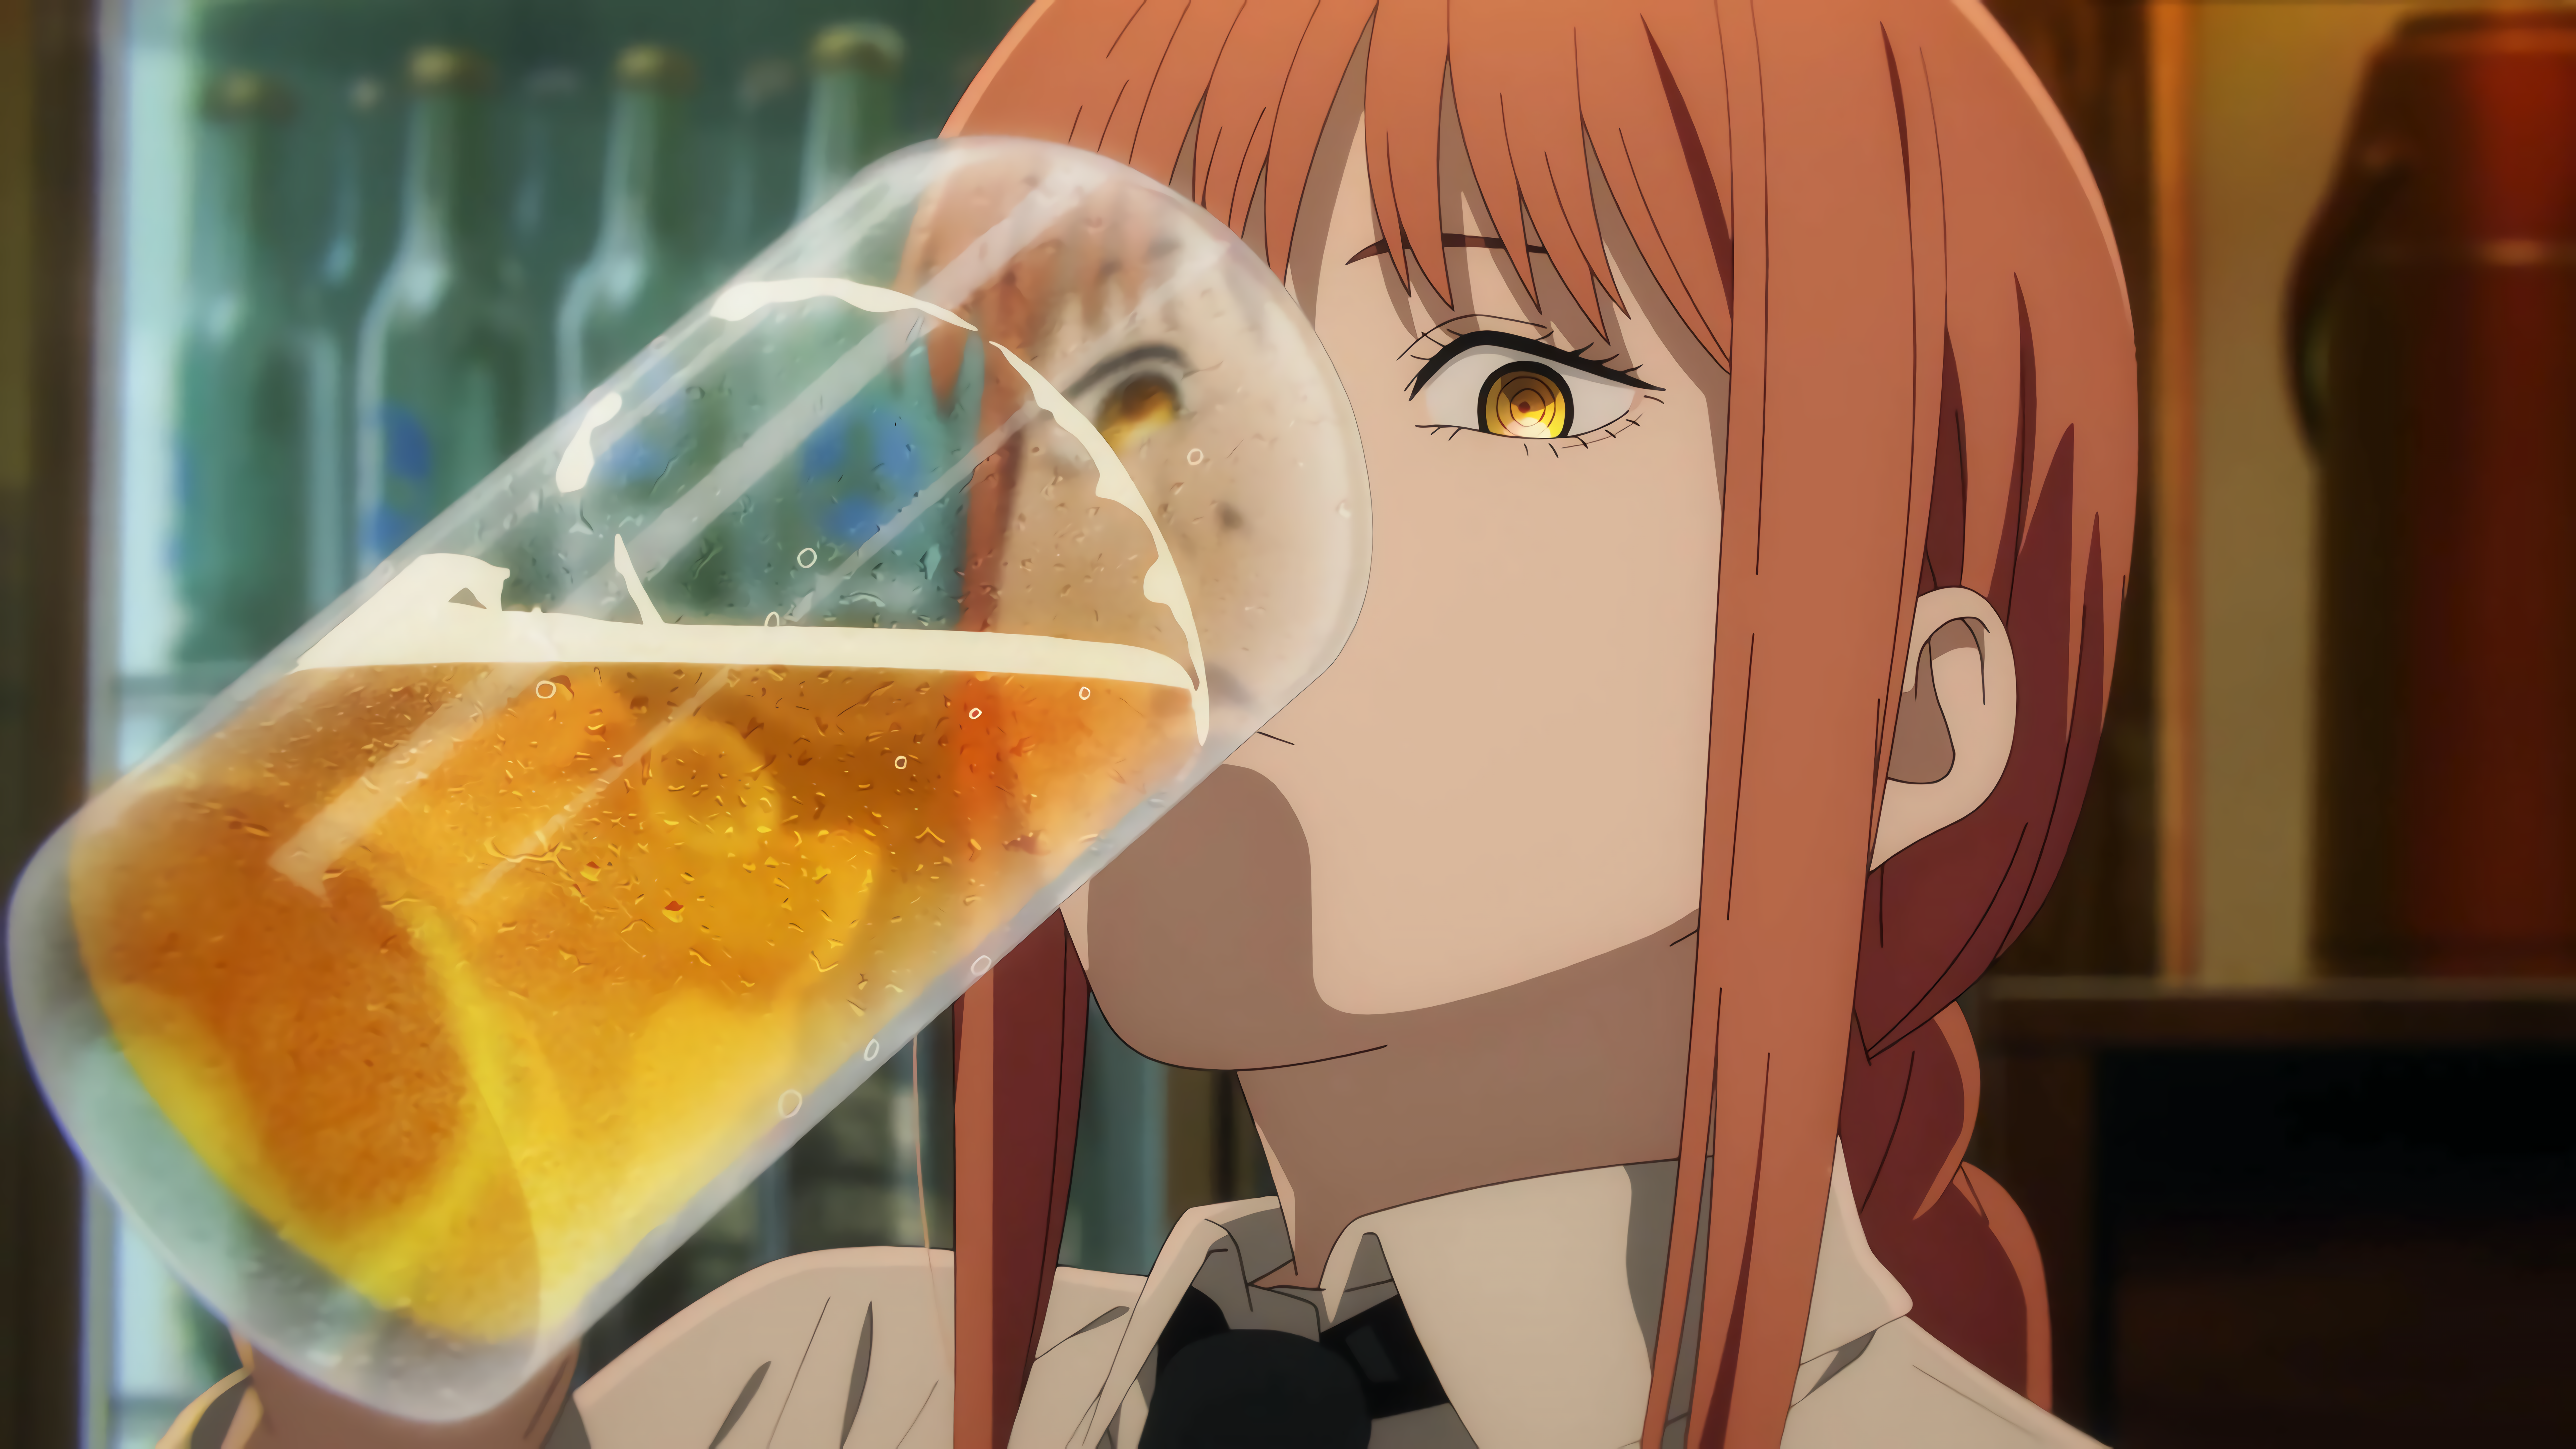 The Seven Deadly Sins | Brewerianimelogs (Anime and Beer Lore)